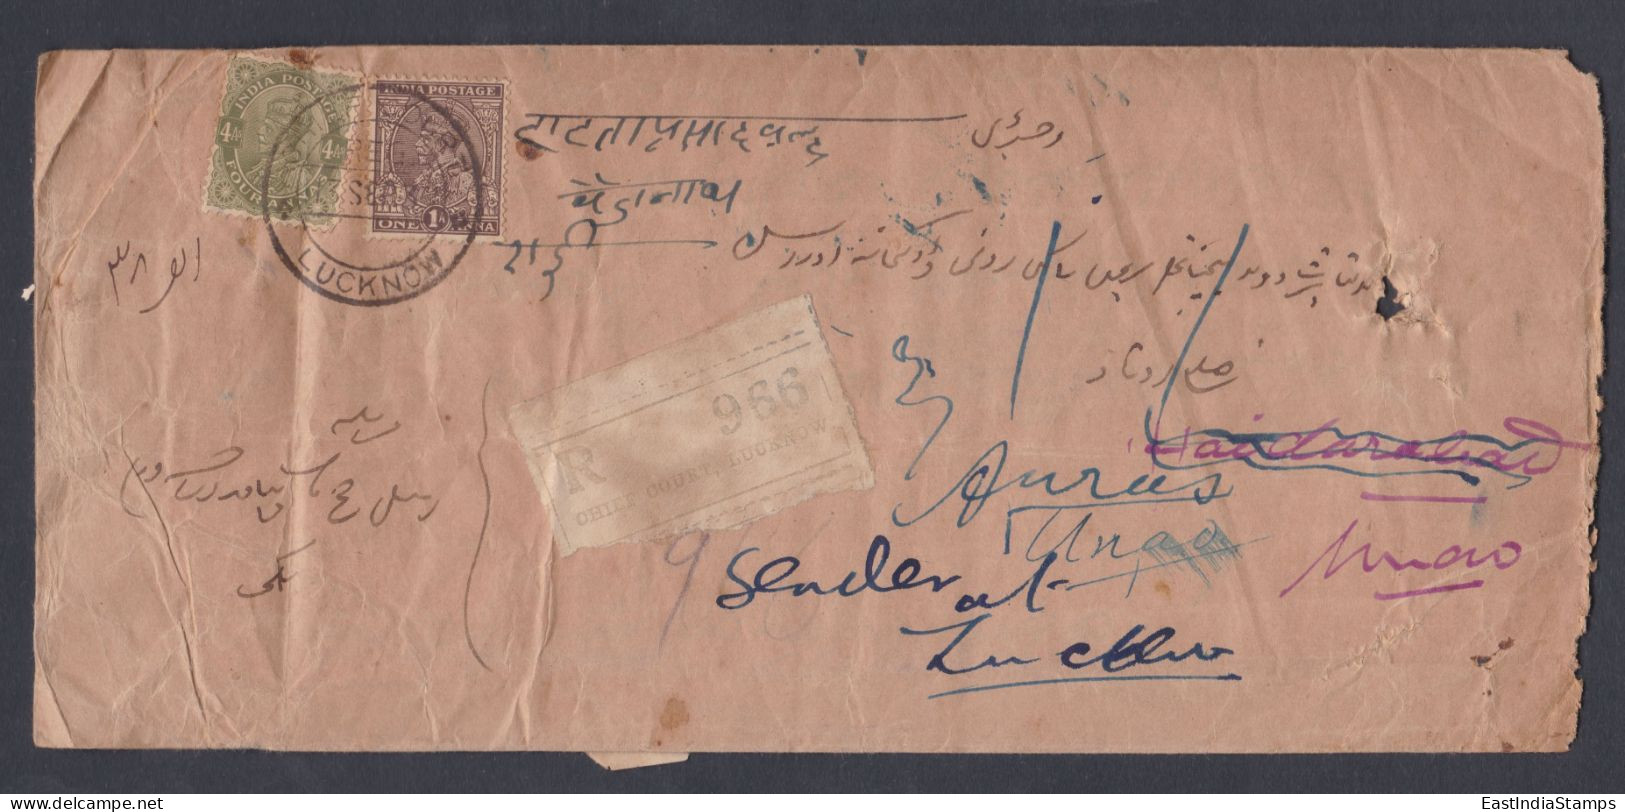 Inde British India 1937 Used Registered Cover, Civil Judge, Lucknow To Unao, Return Mail, King George V Stamps - 1911-35 King George V